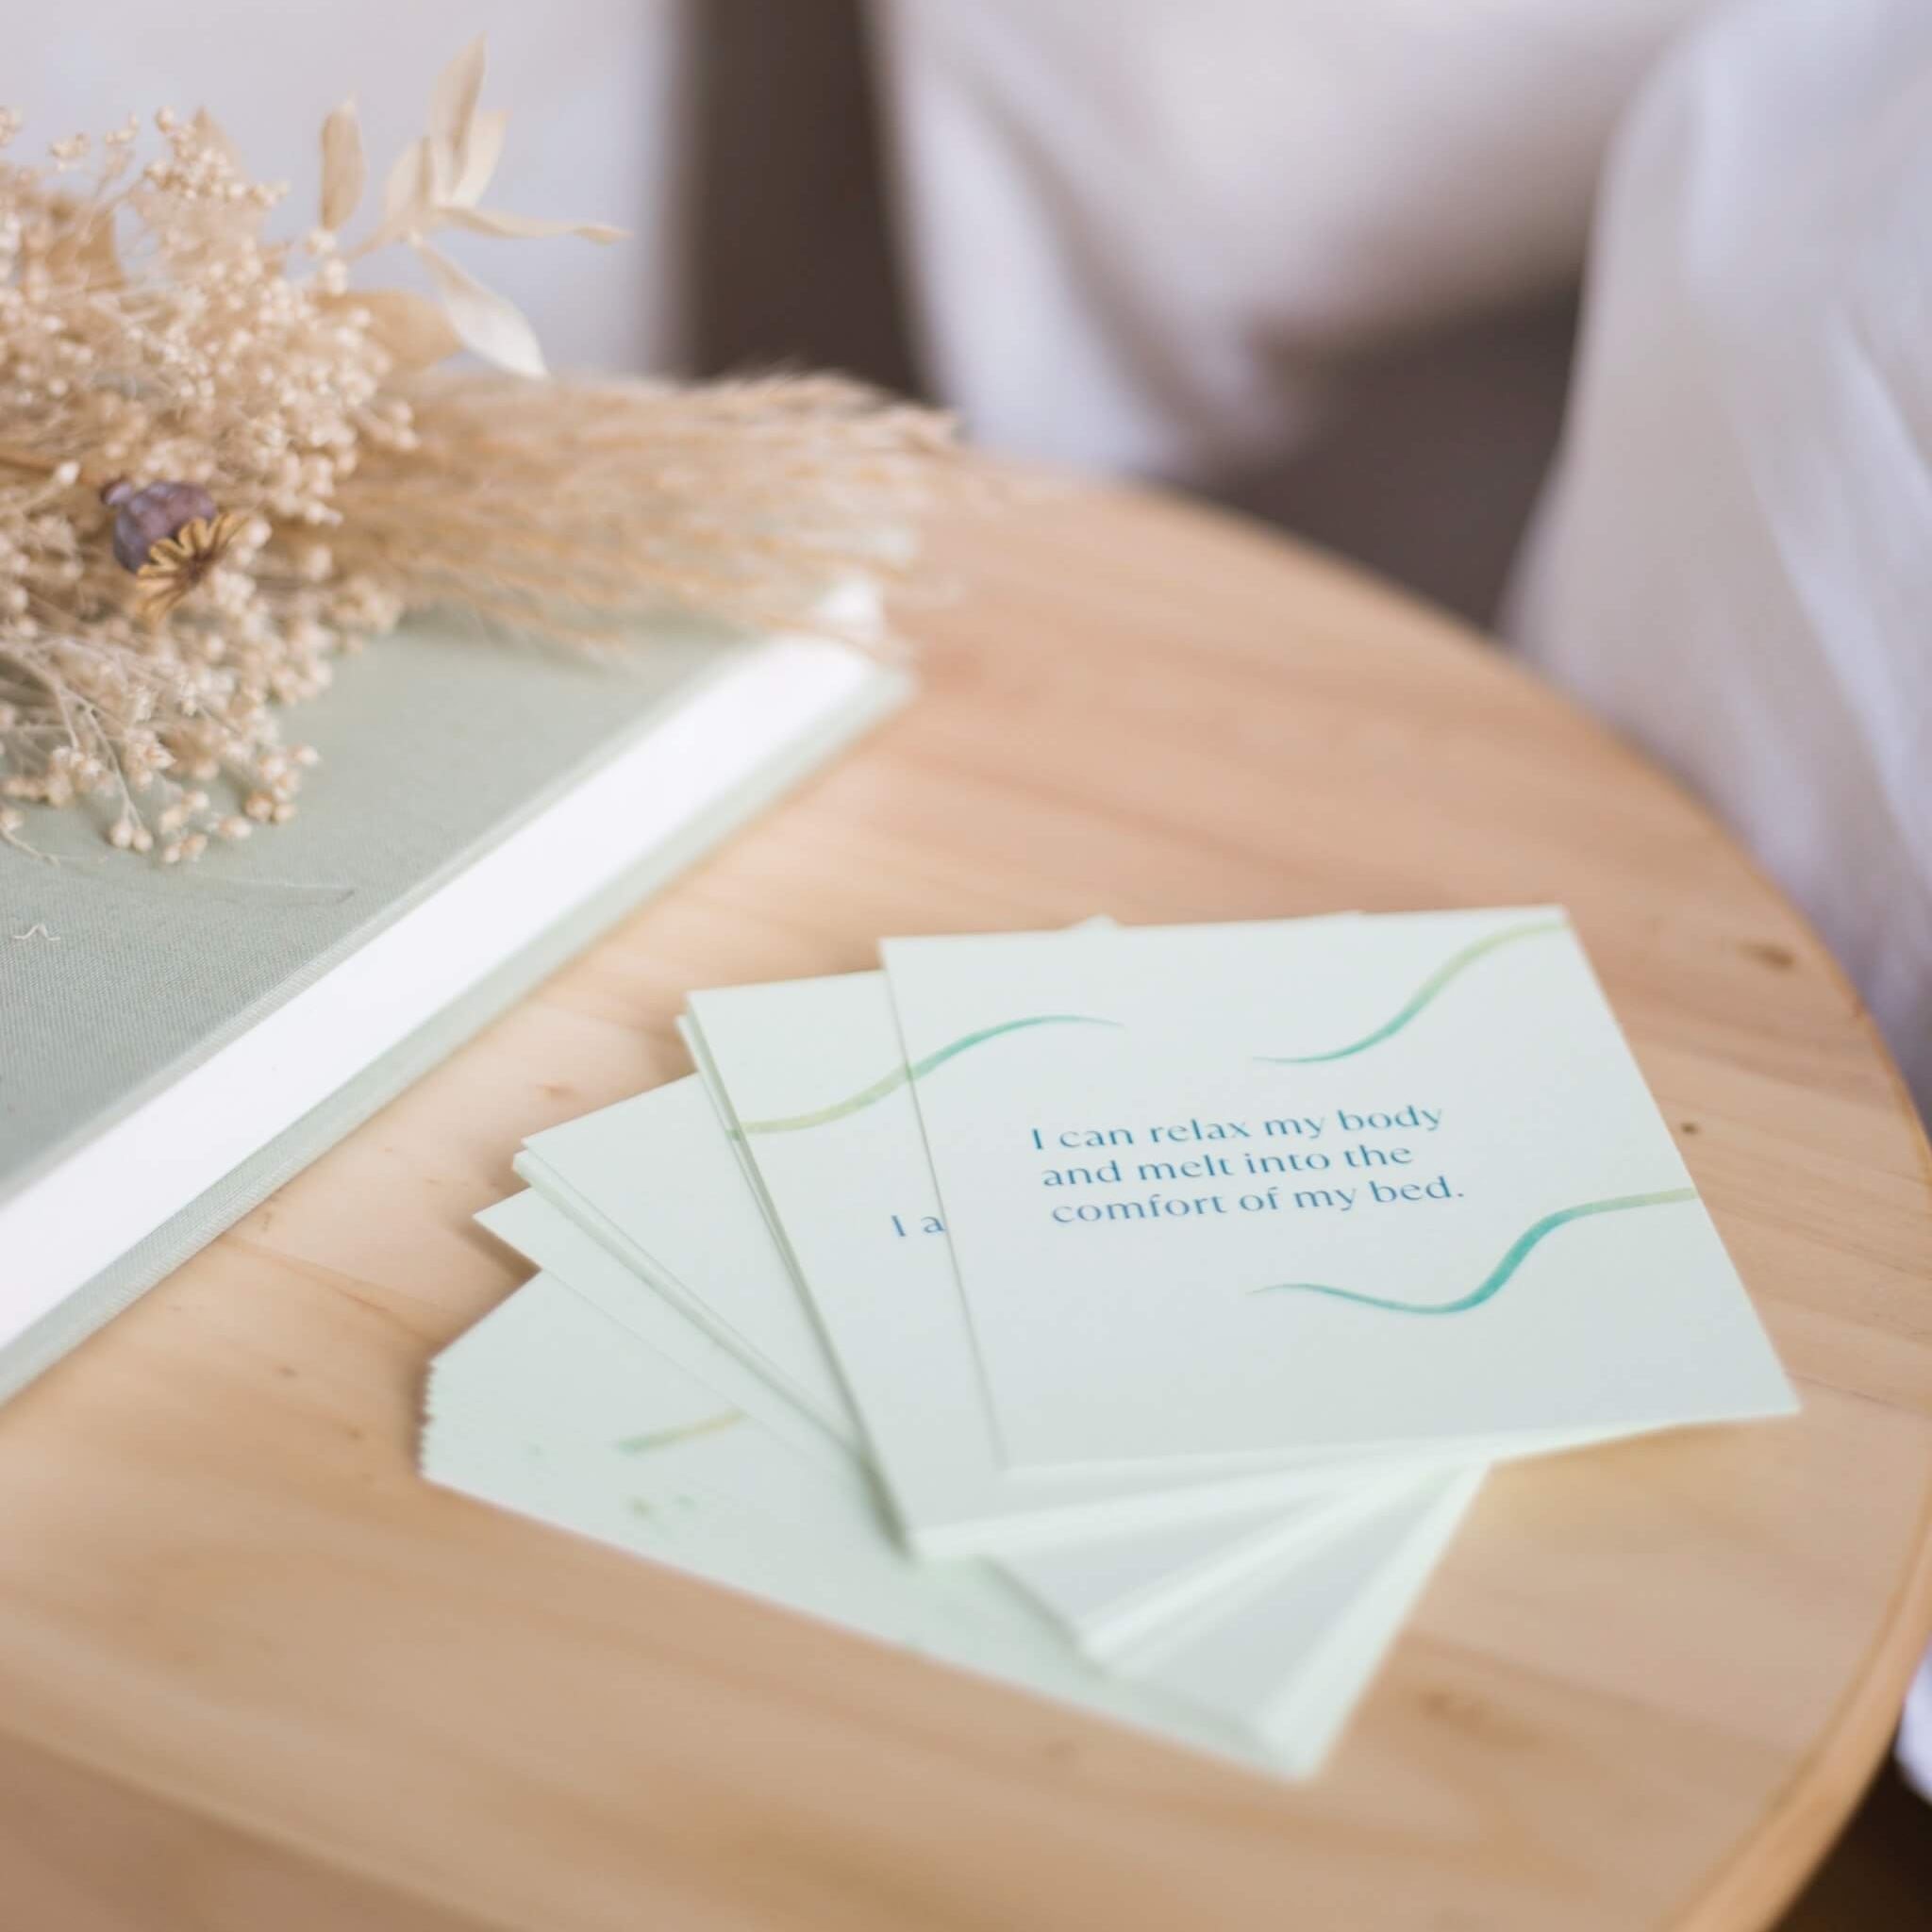 sleep affirmation cards for self-compassion gift box